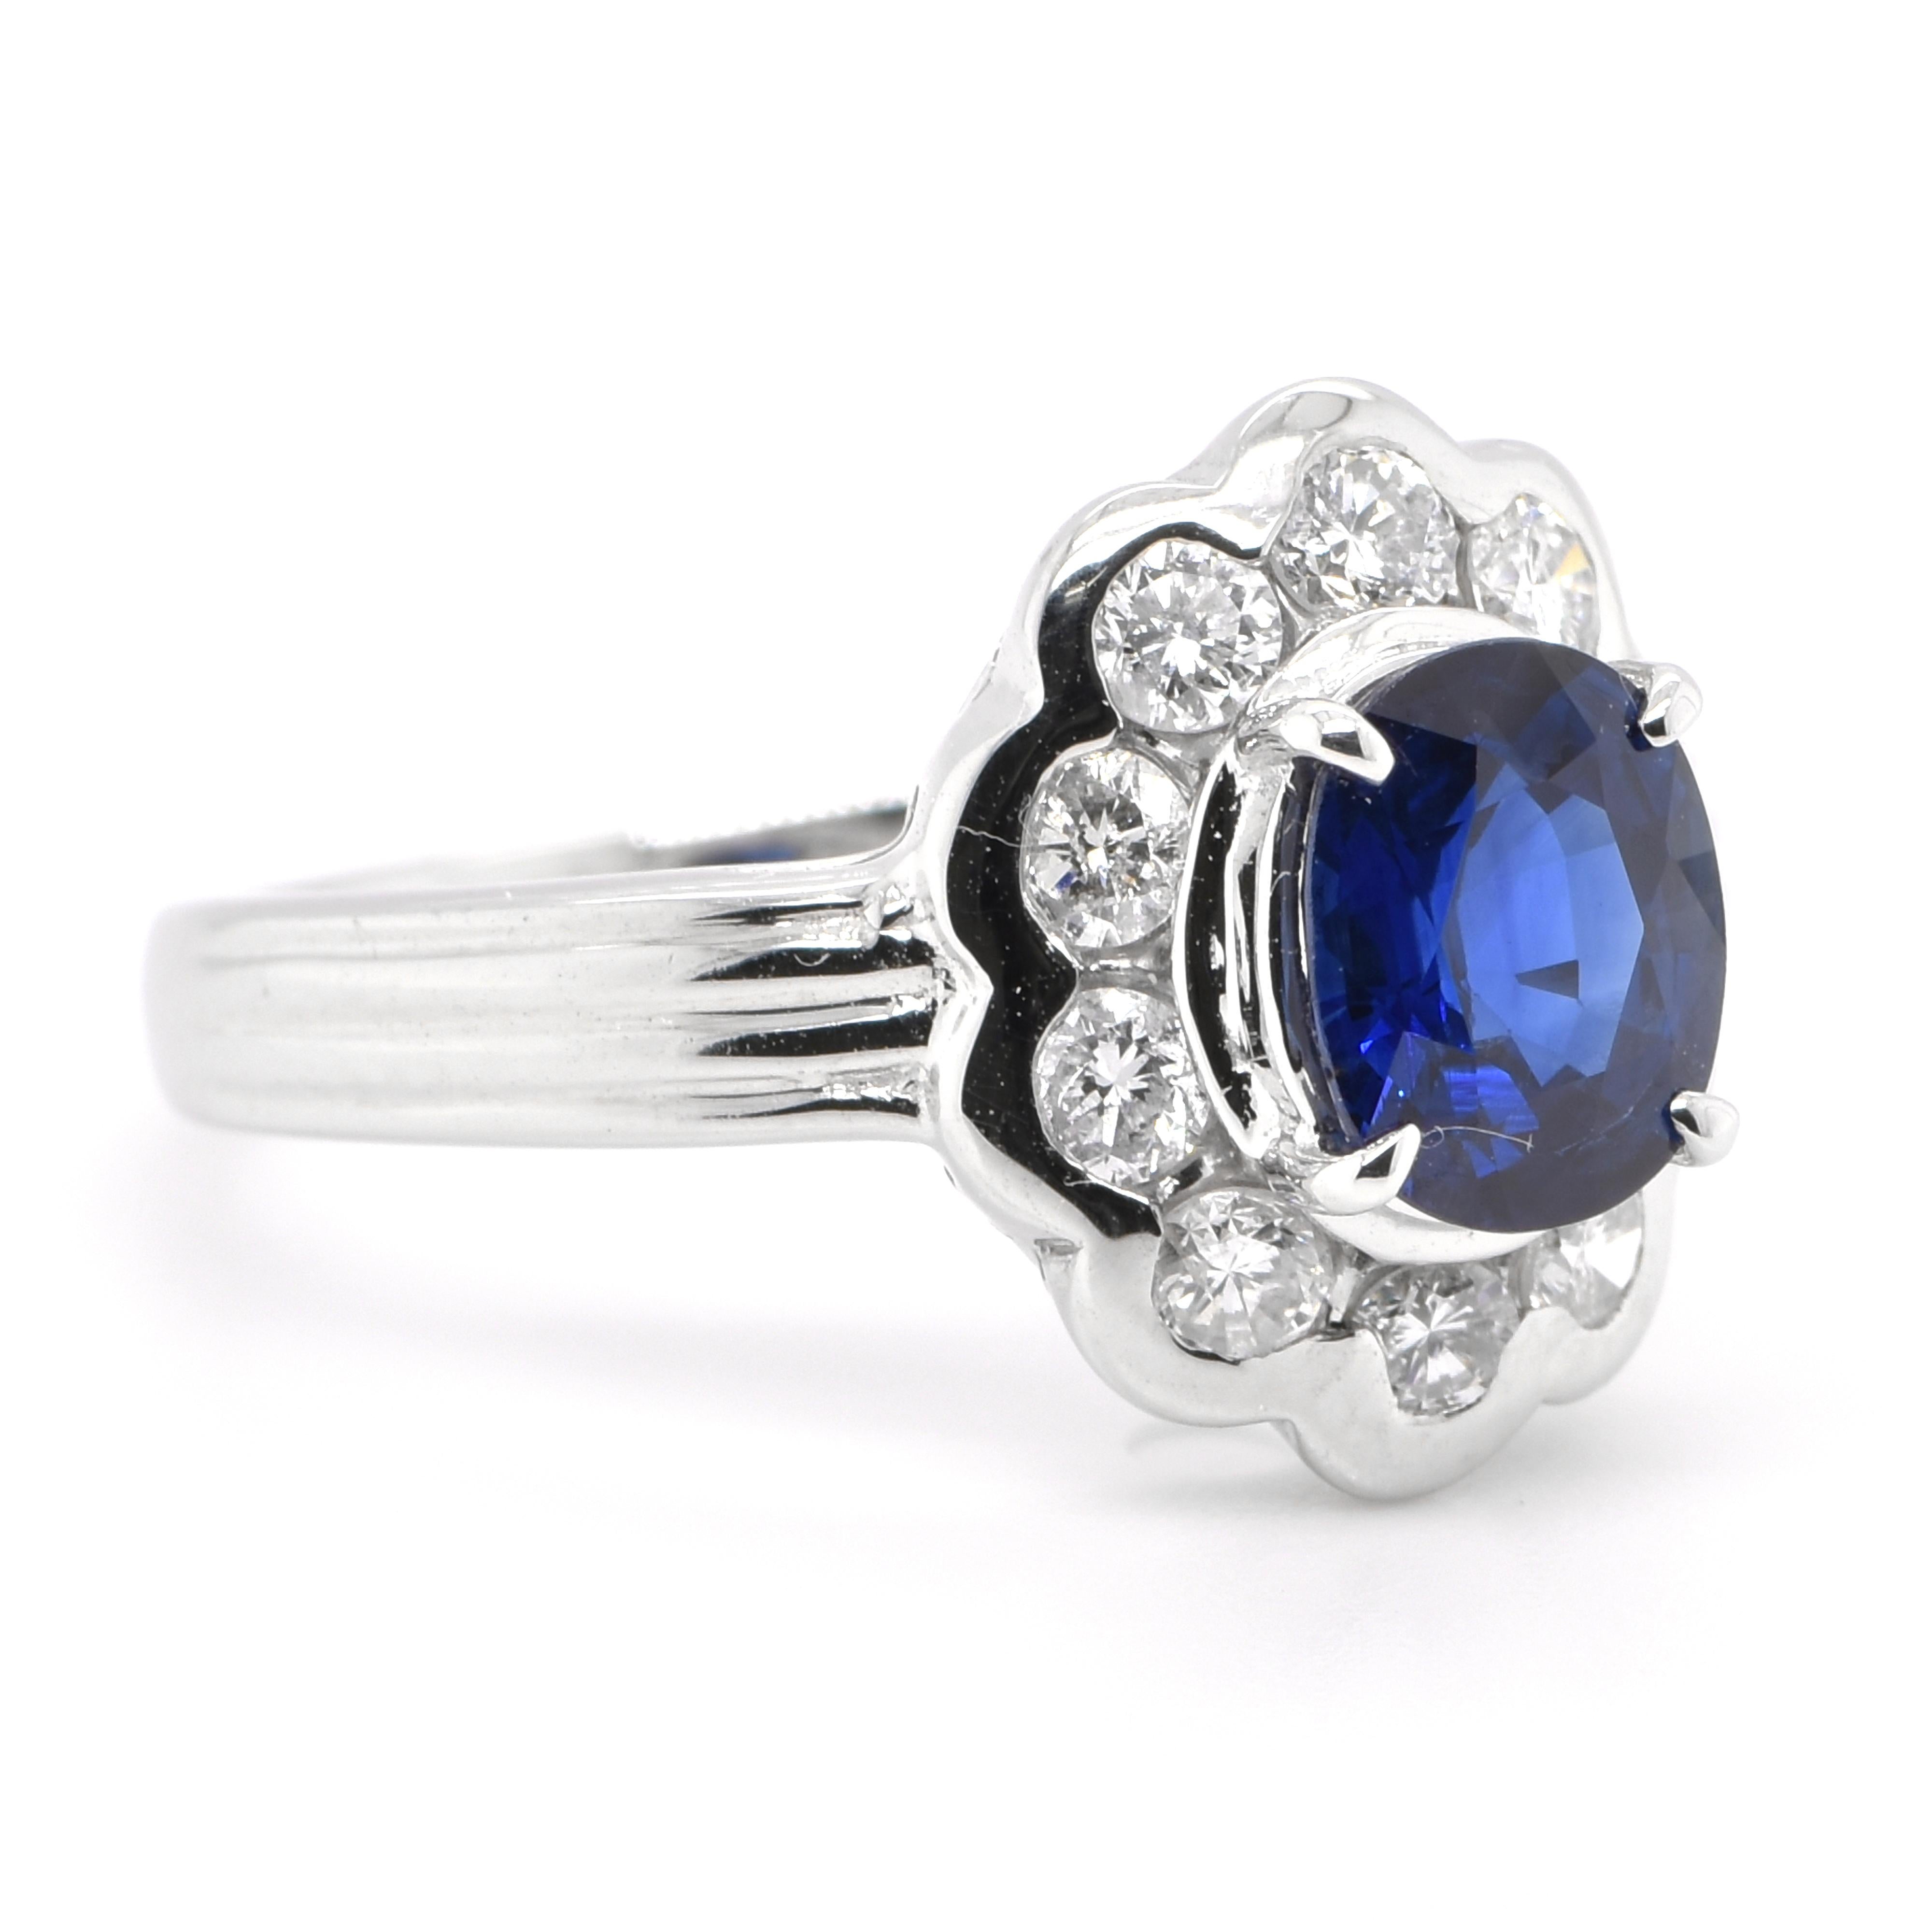 Edwardian 1.18 Carat Natural Sapphire and Diamond Antique Ring Set in Platinum For Sale